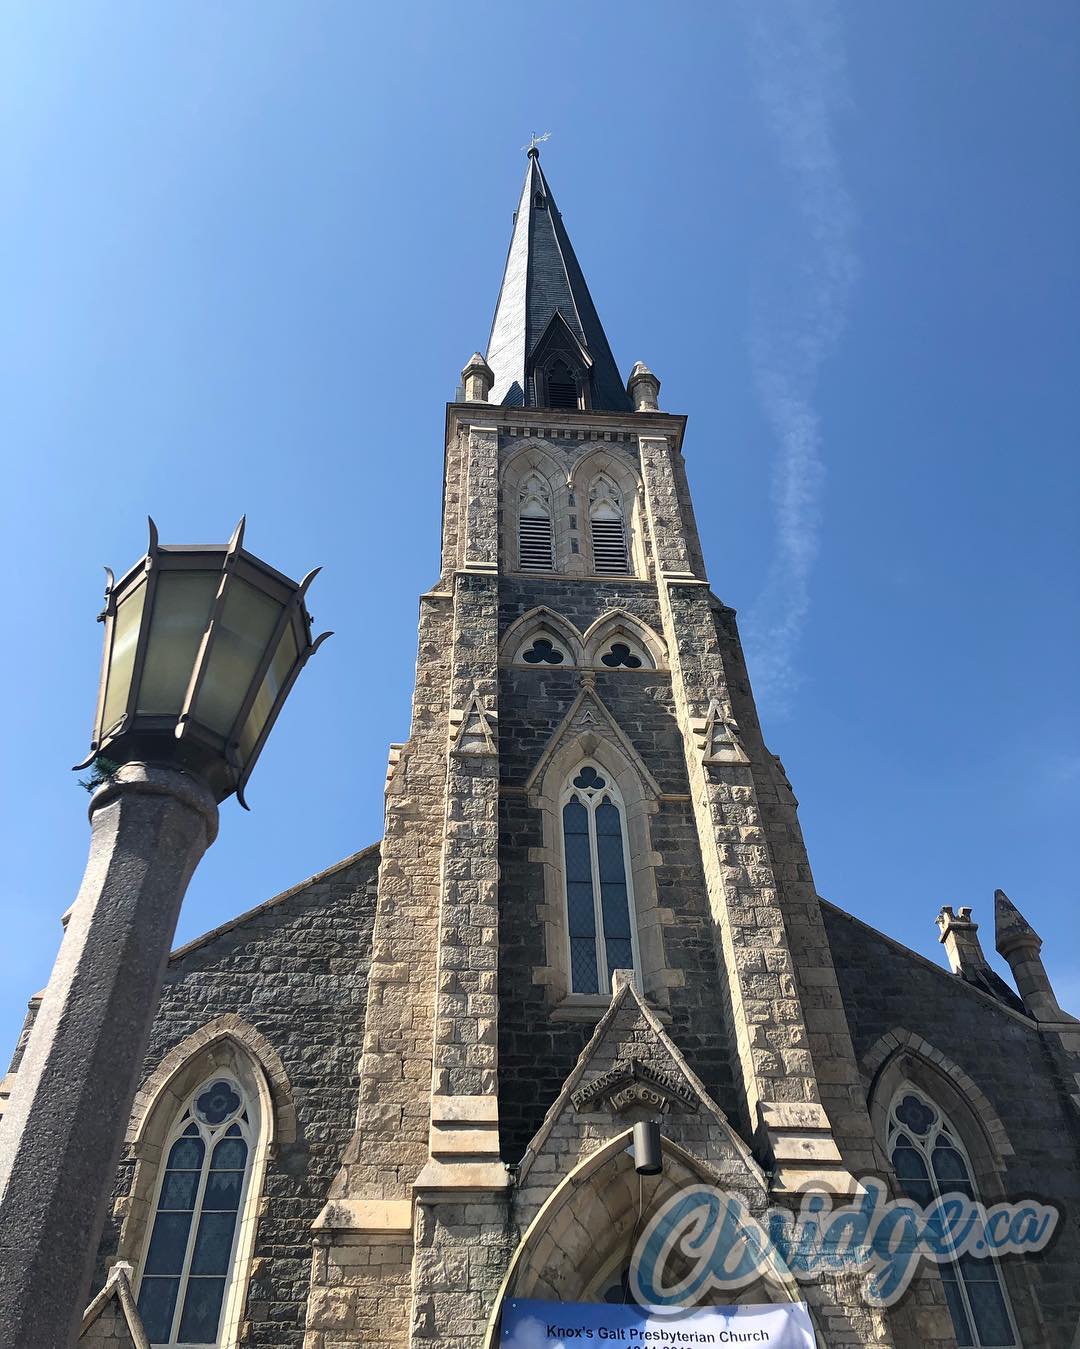 Congratulations to Knox’s Galt Presbyterian Church for 175 years of service to our community! #cbridge